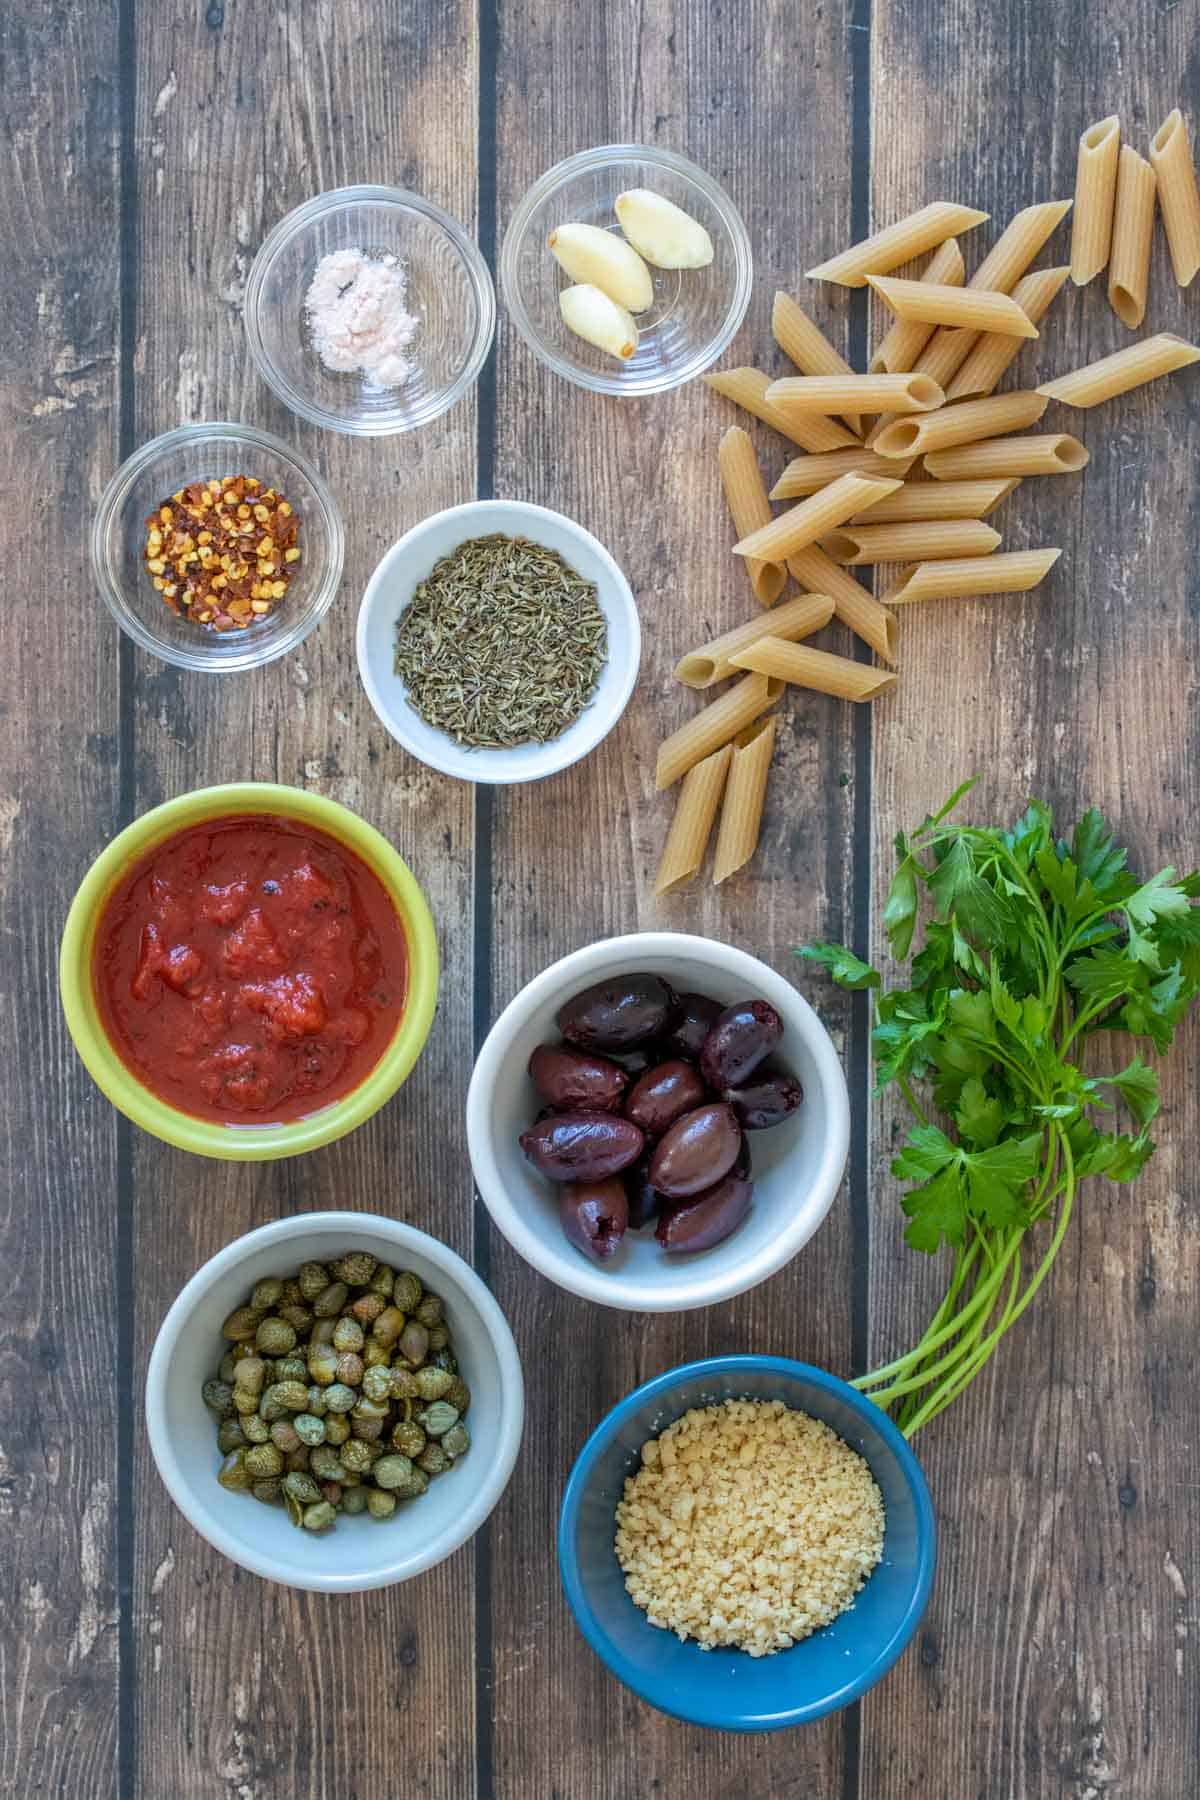 Penne pasta and parsley next to bowls of ingredients needed to make pasta puttanesca on a wooden surface